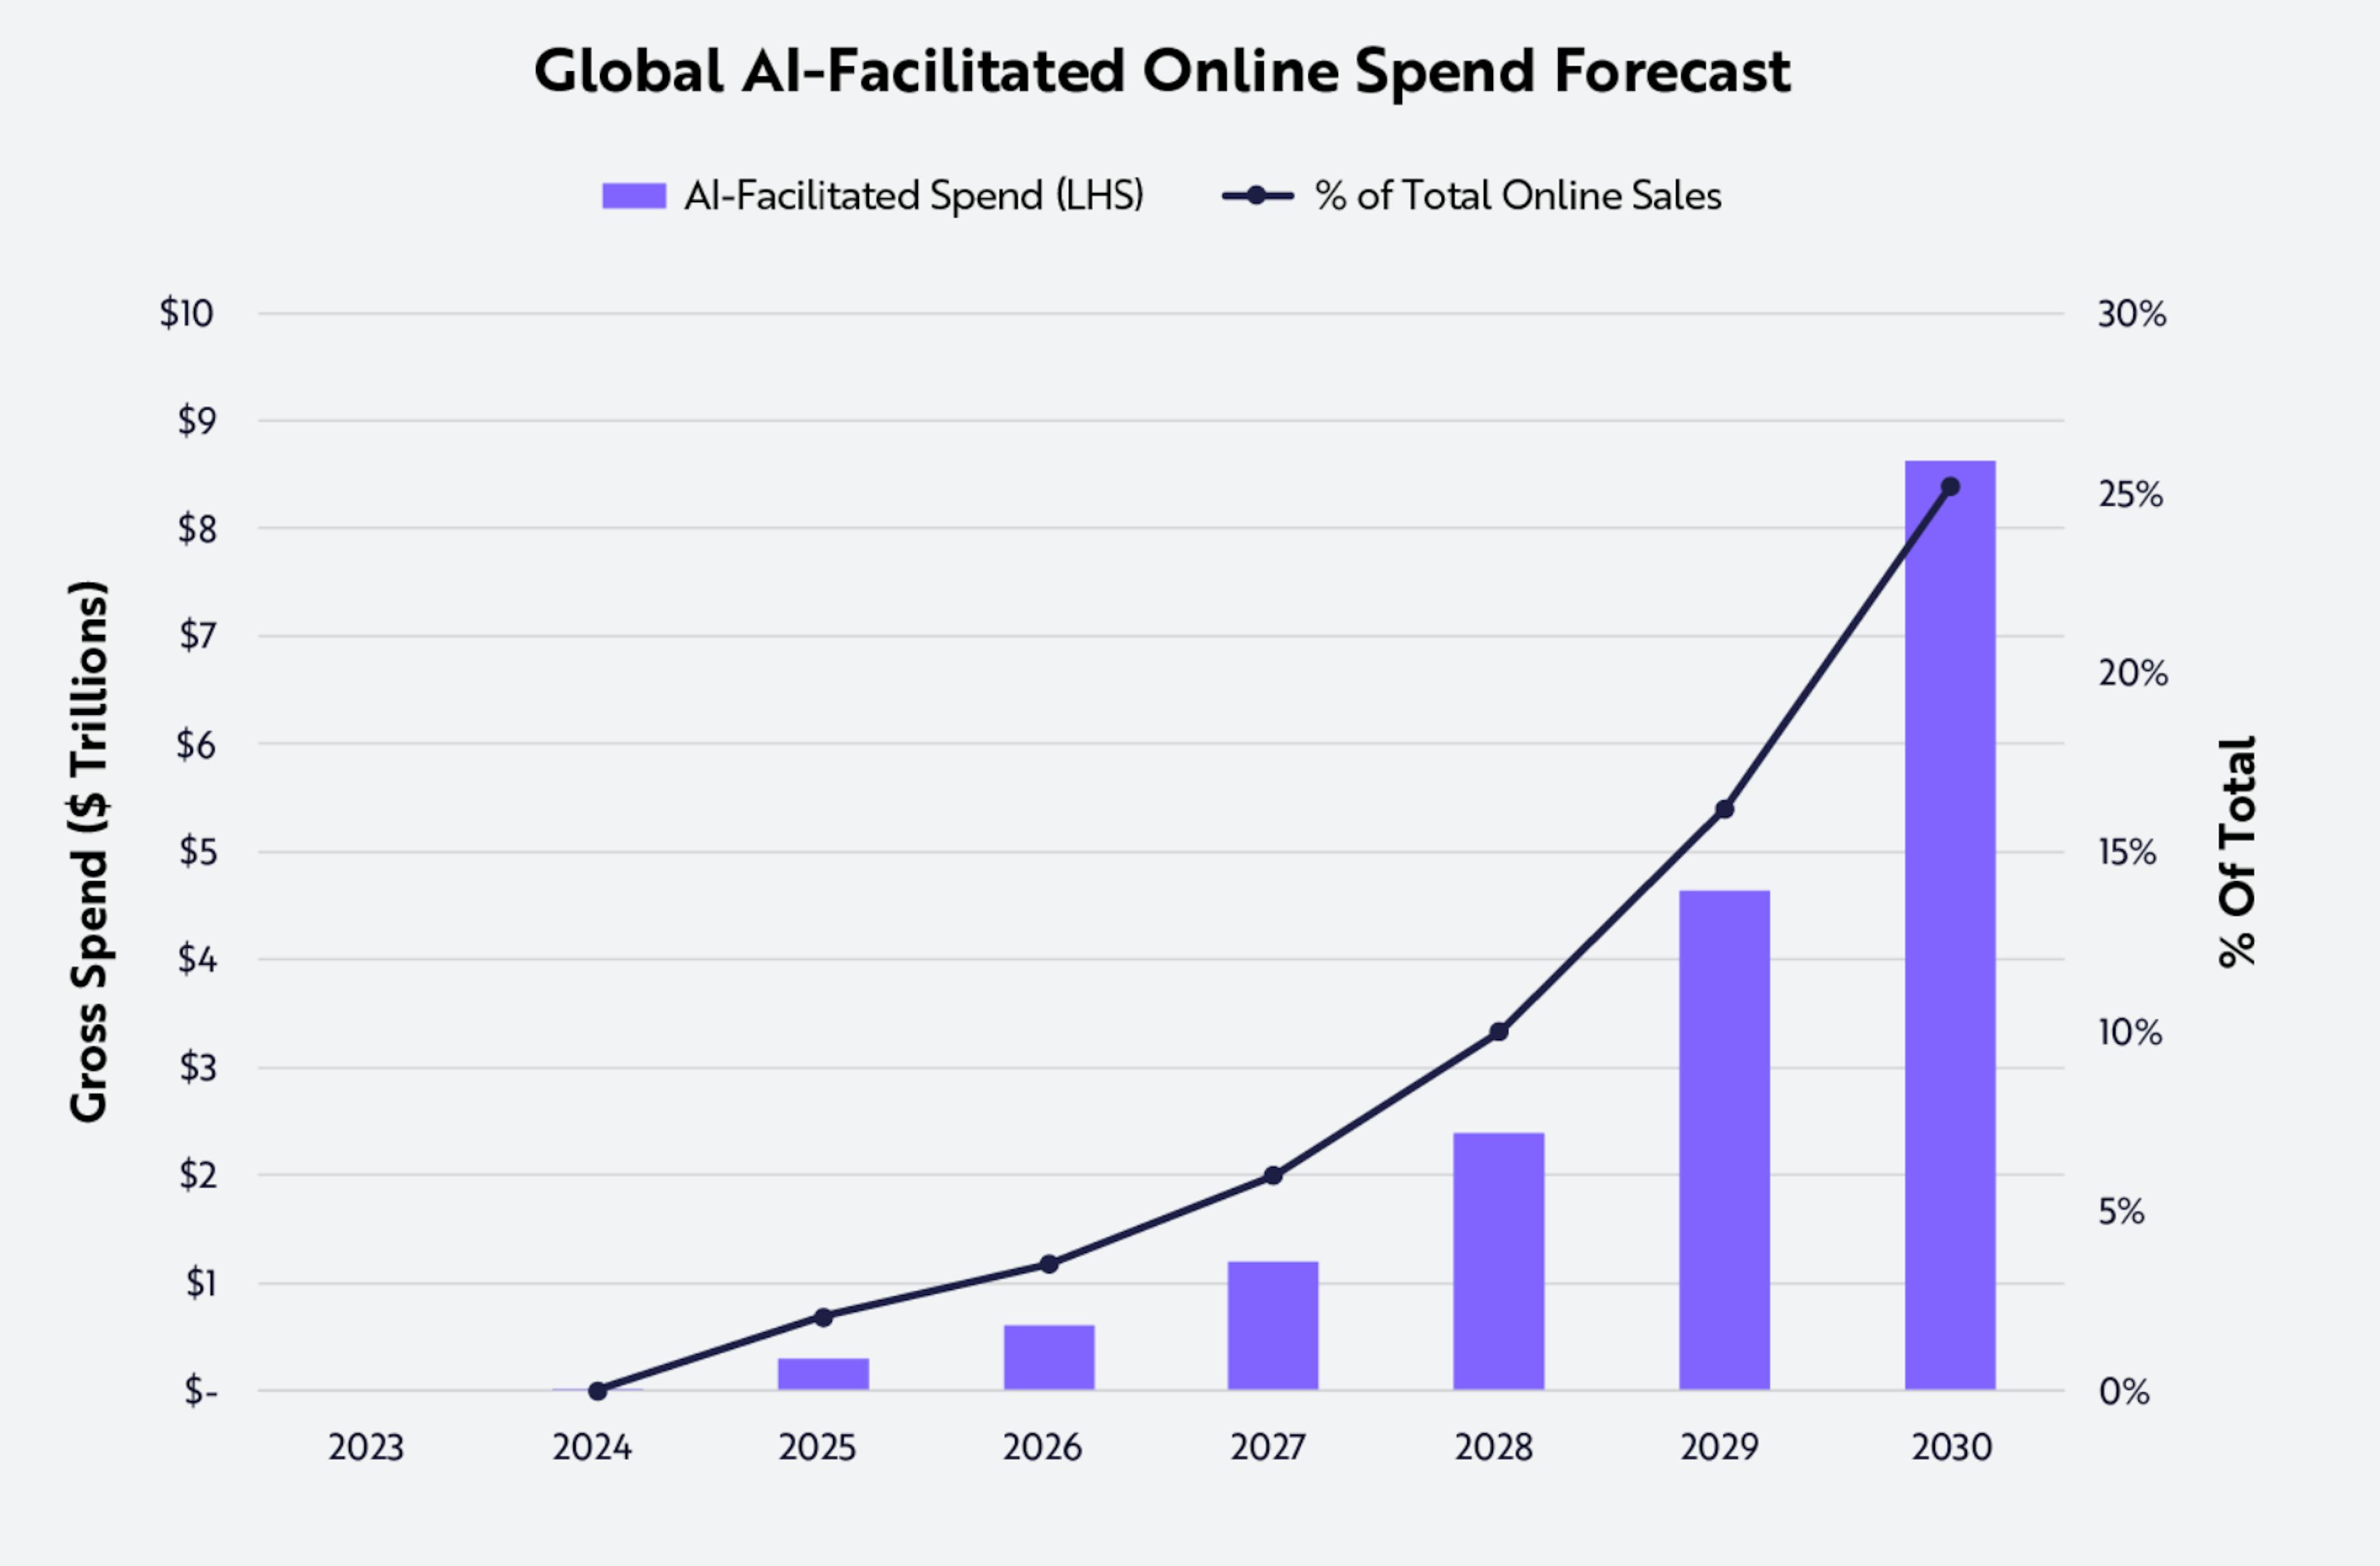 featured image - AI Facilitated Online Sales Forecasted to Reach $9 Trillion by 2030 